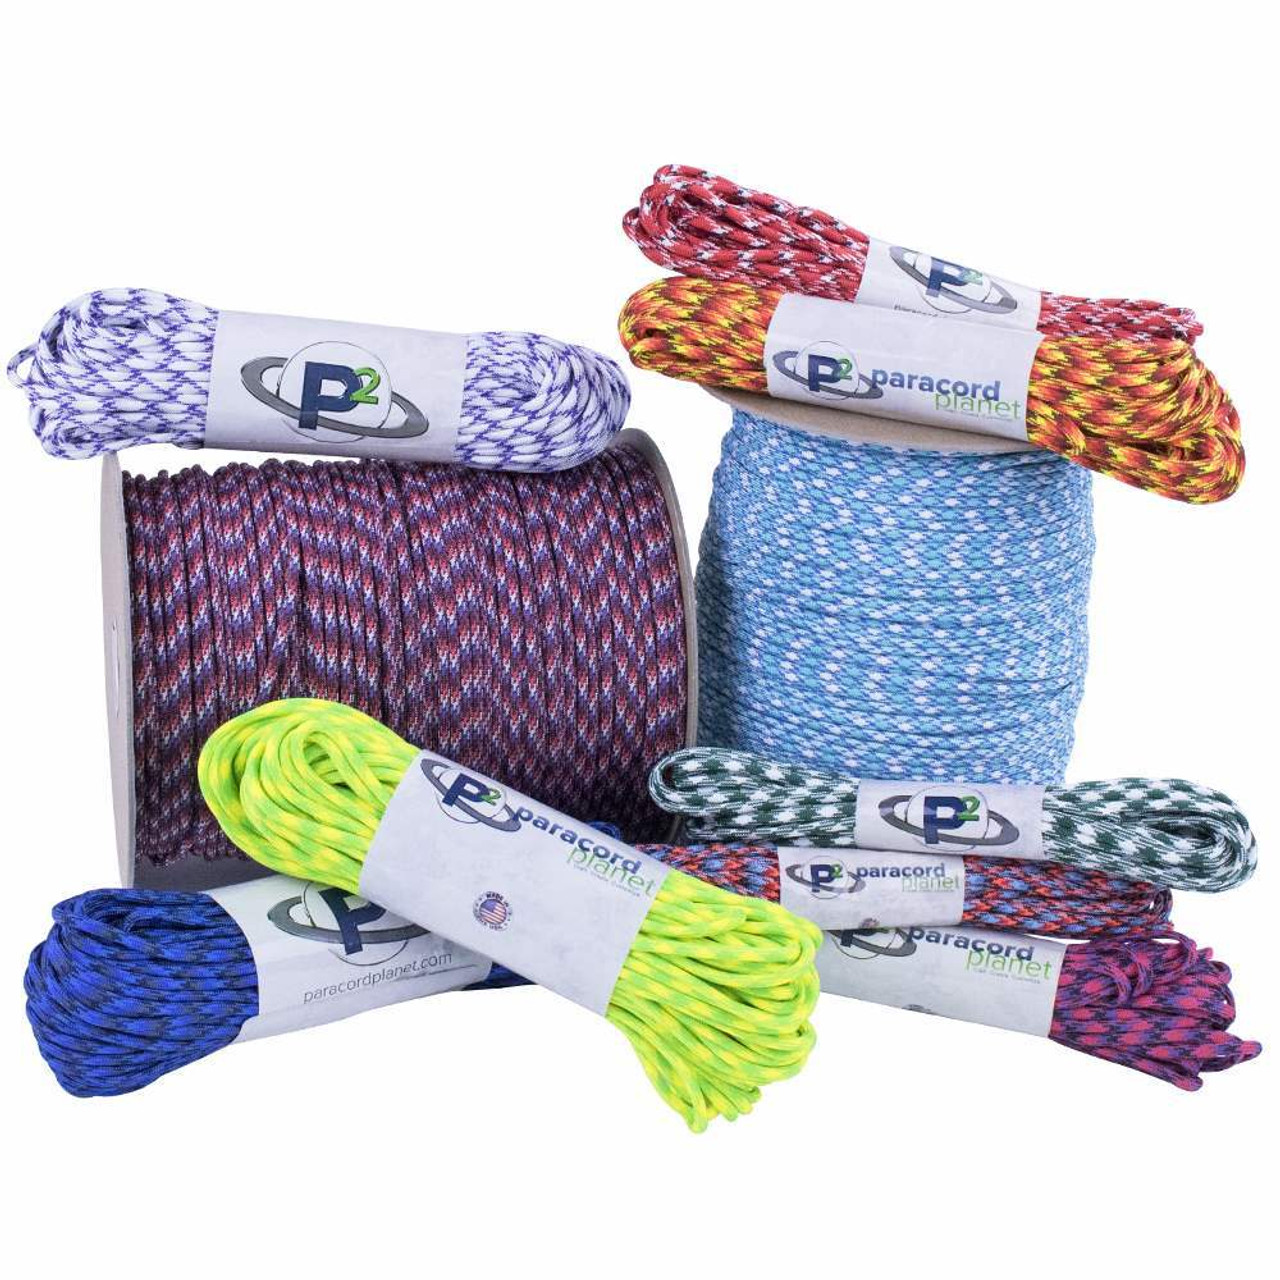 Paracord Planet D-Rings - Multiple Size Options - 1 Inch, 3/4 Inch, 1 1/4  Inch, 1/2 Inch - Choose From 5, 10, 25, 50, and 100 Piece Pack Sizes -  Comes in Color Gunmetal 